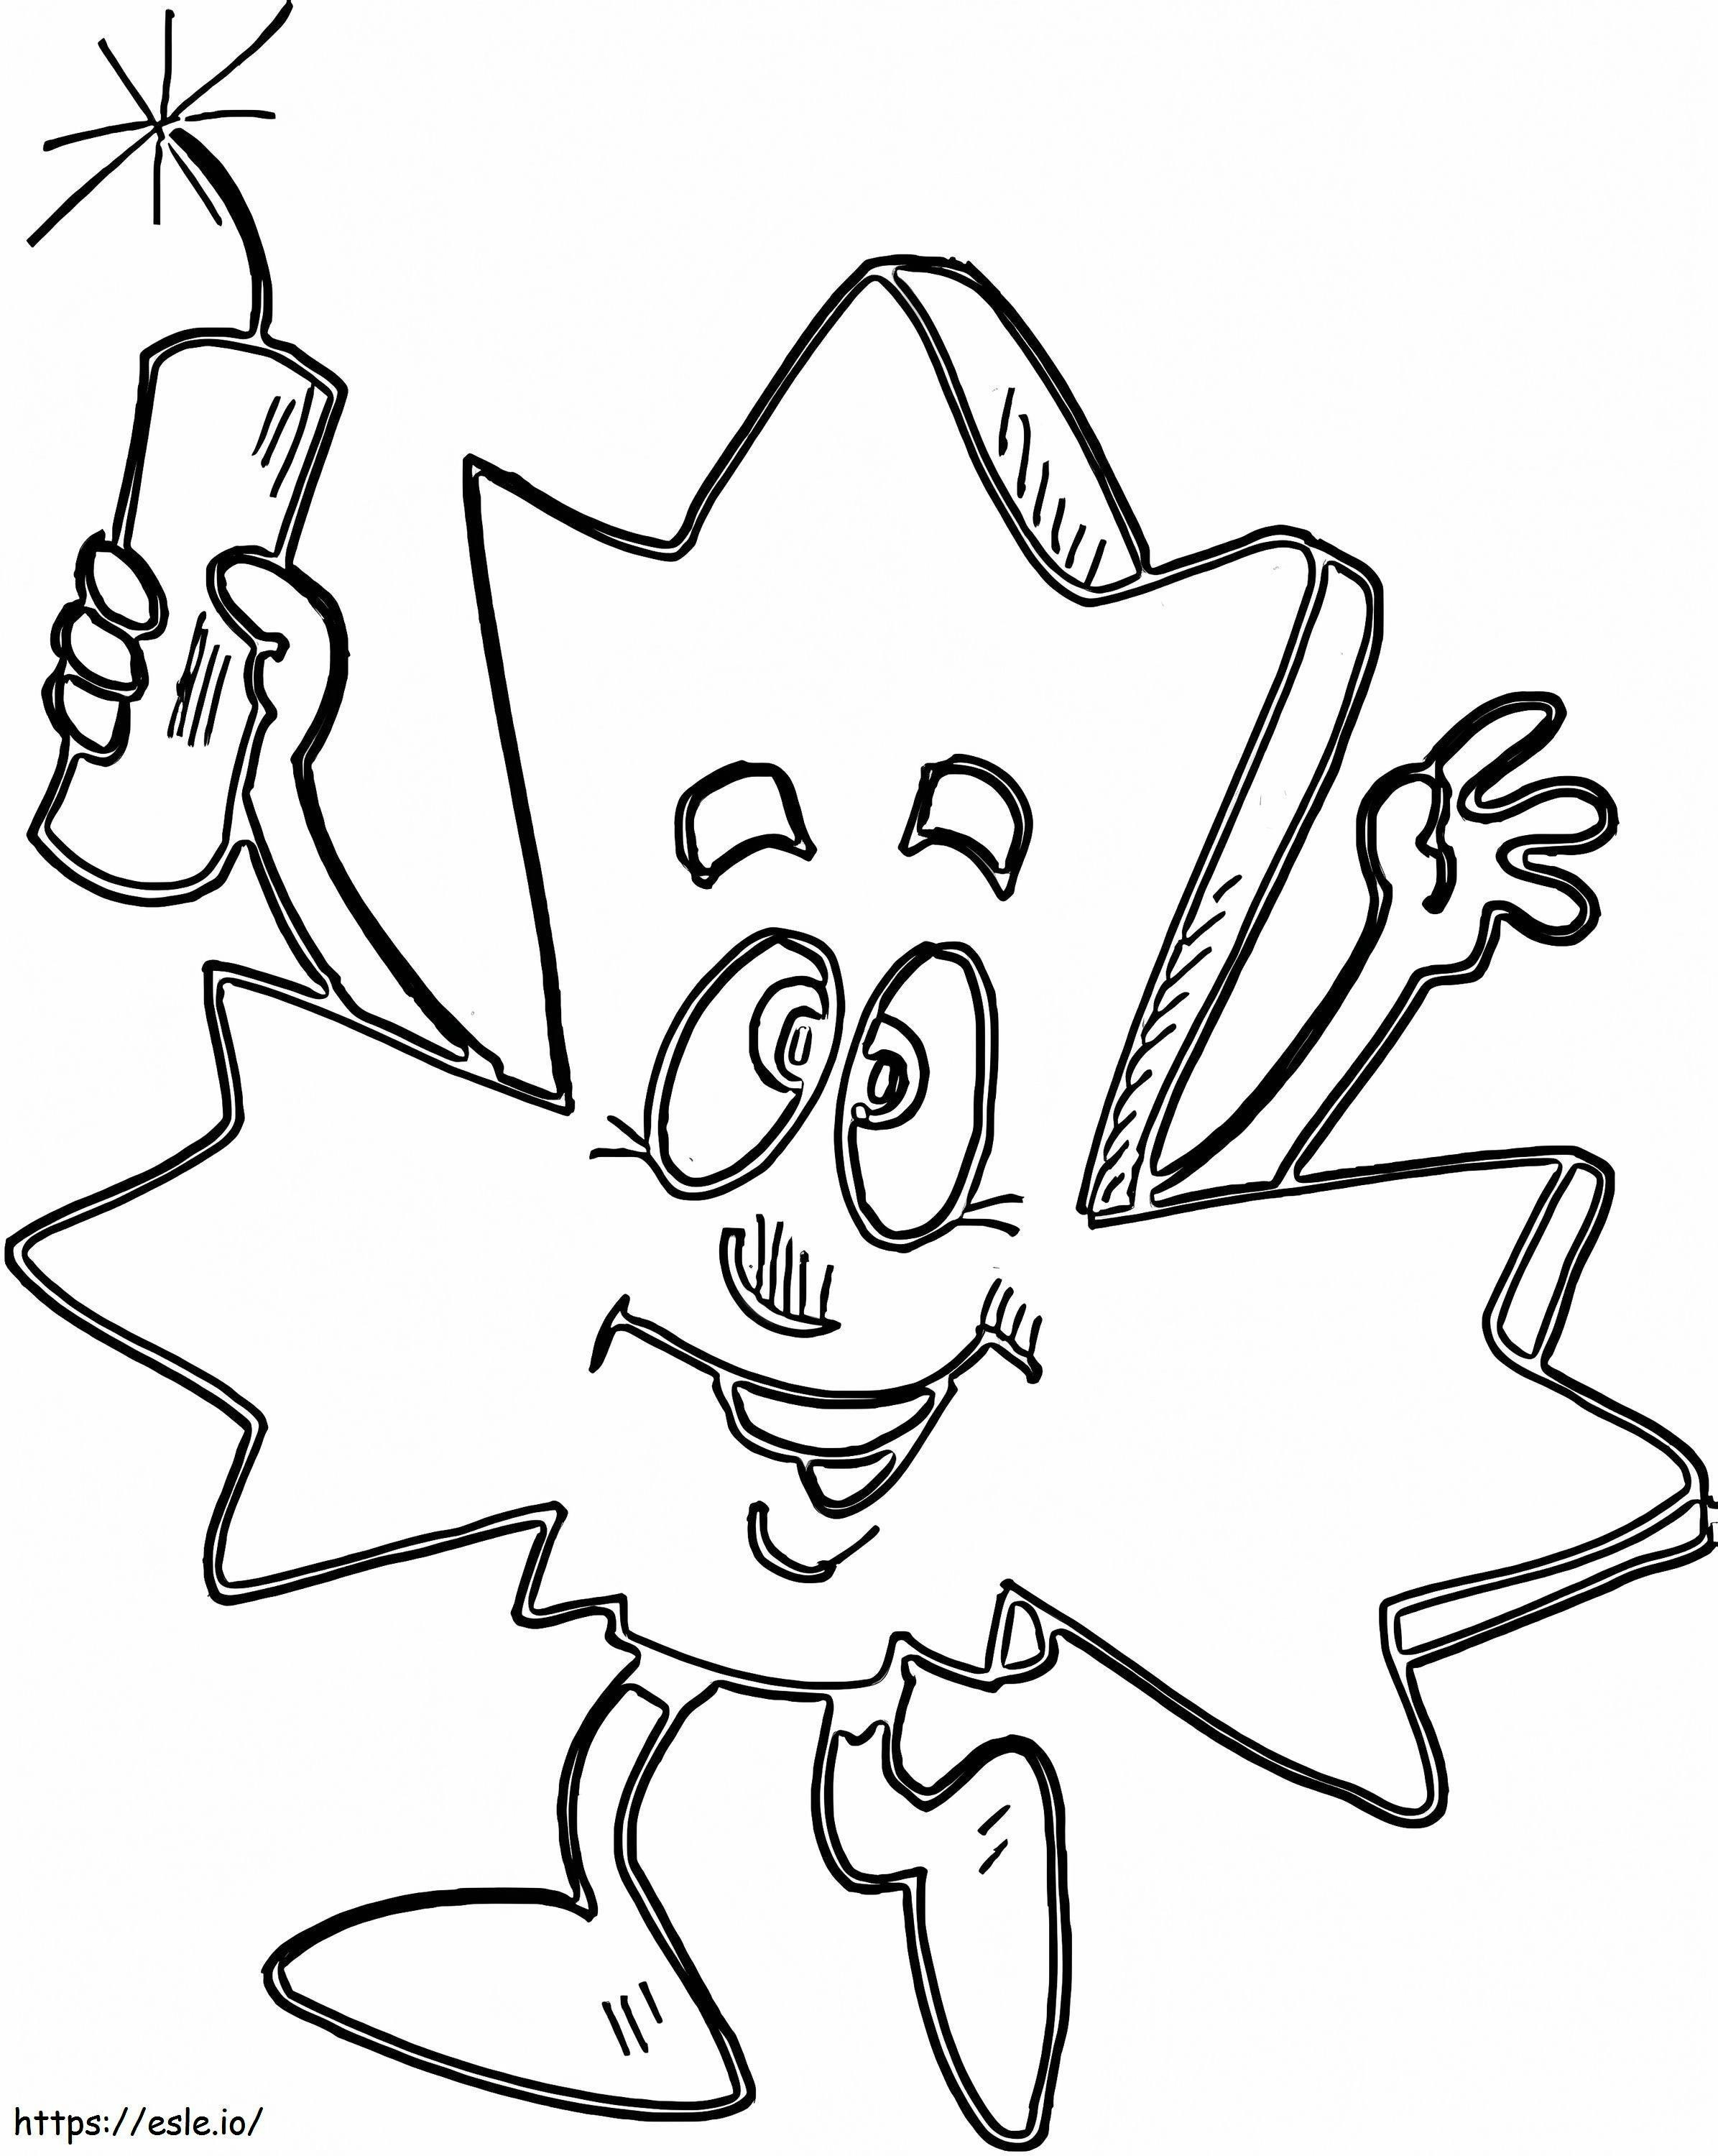 Fun Maple Leaf coloring page